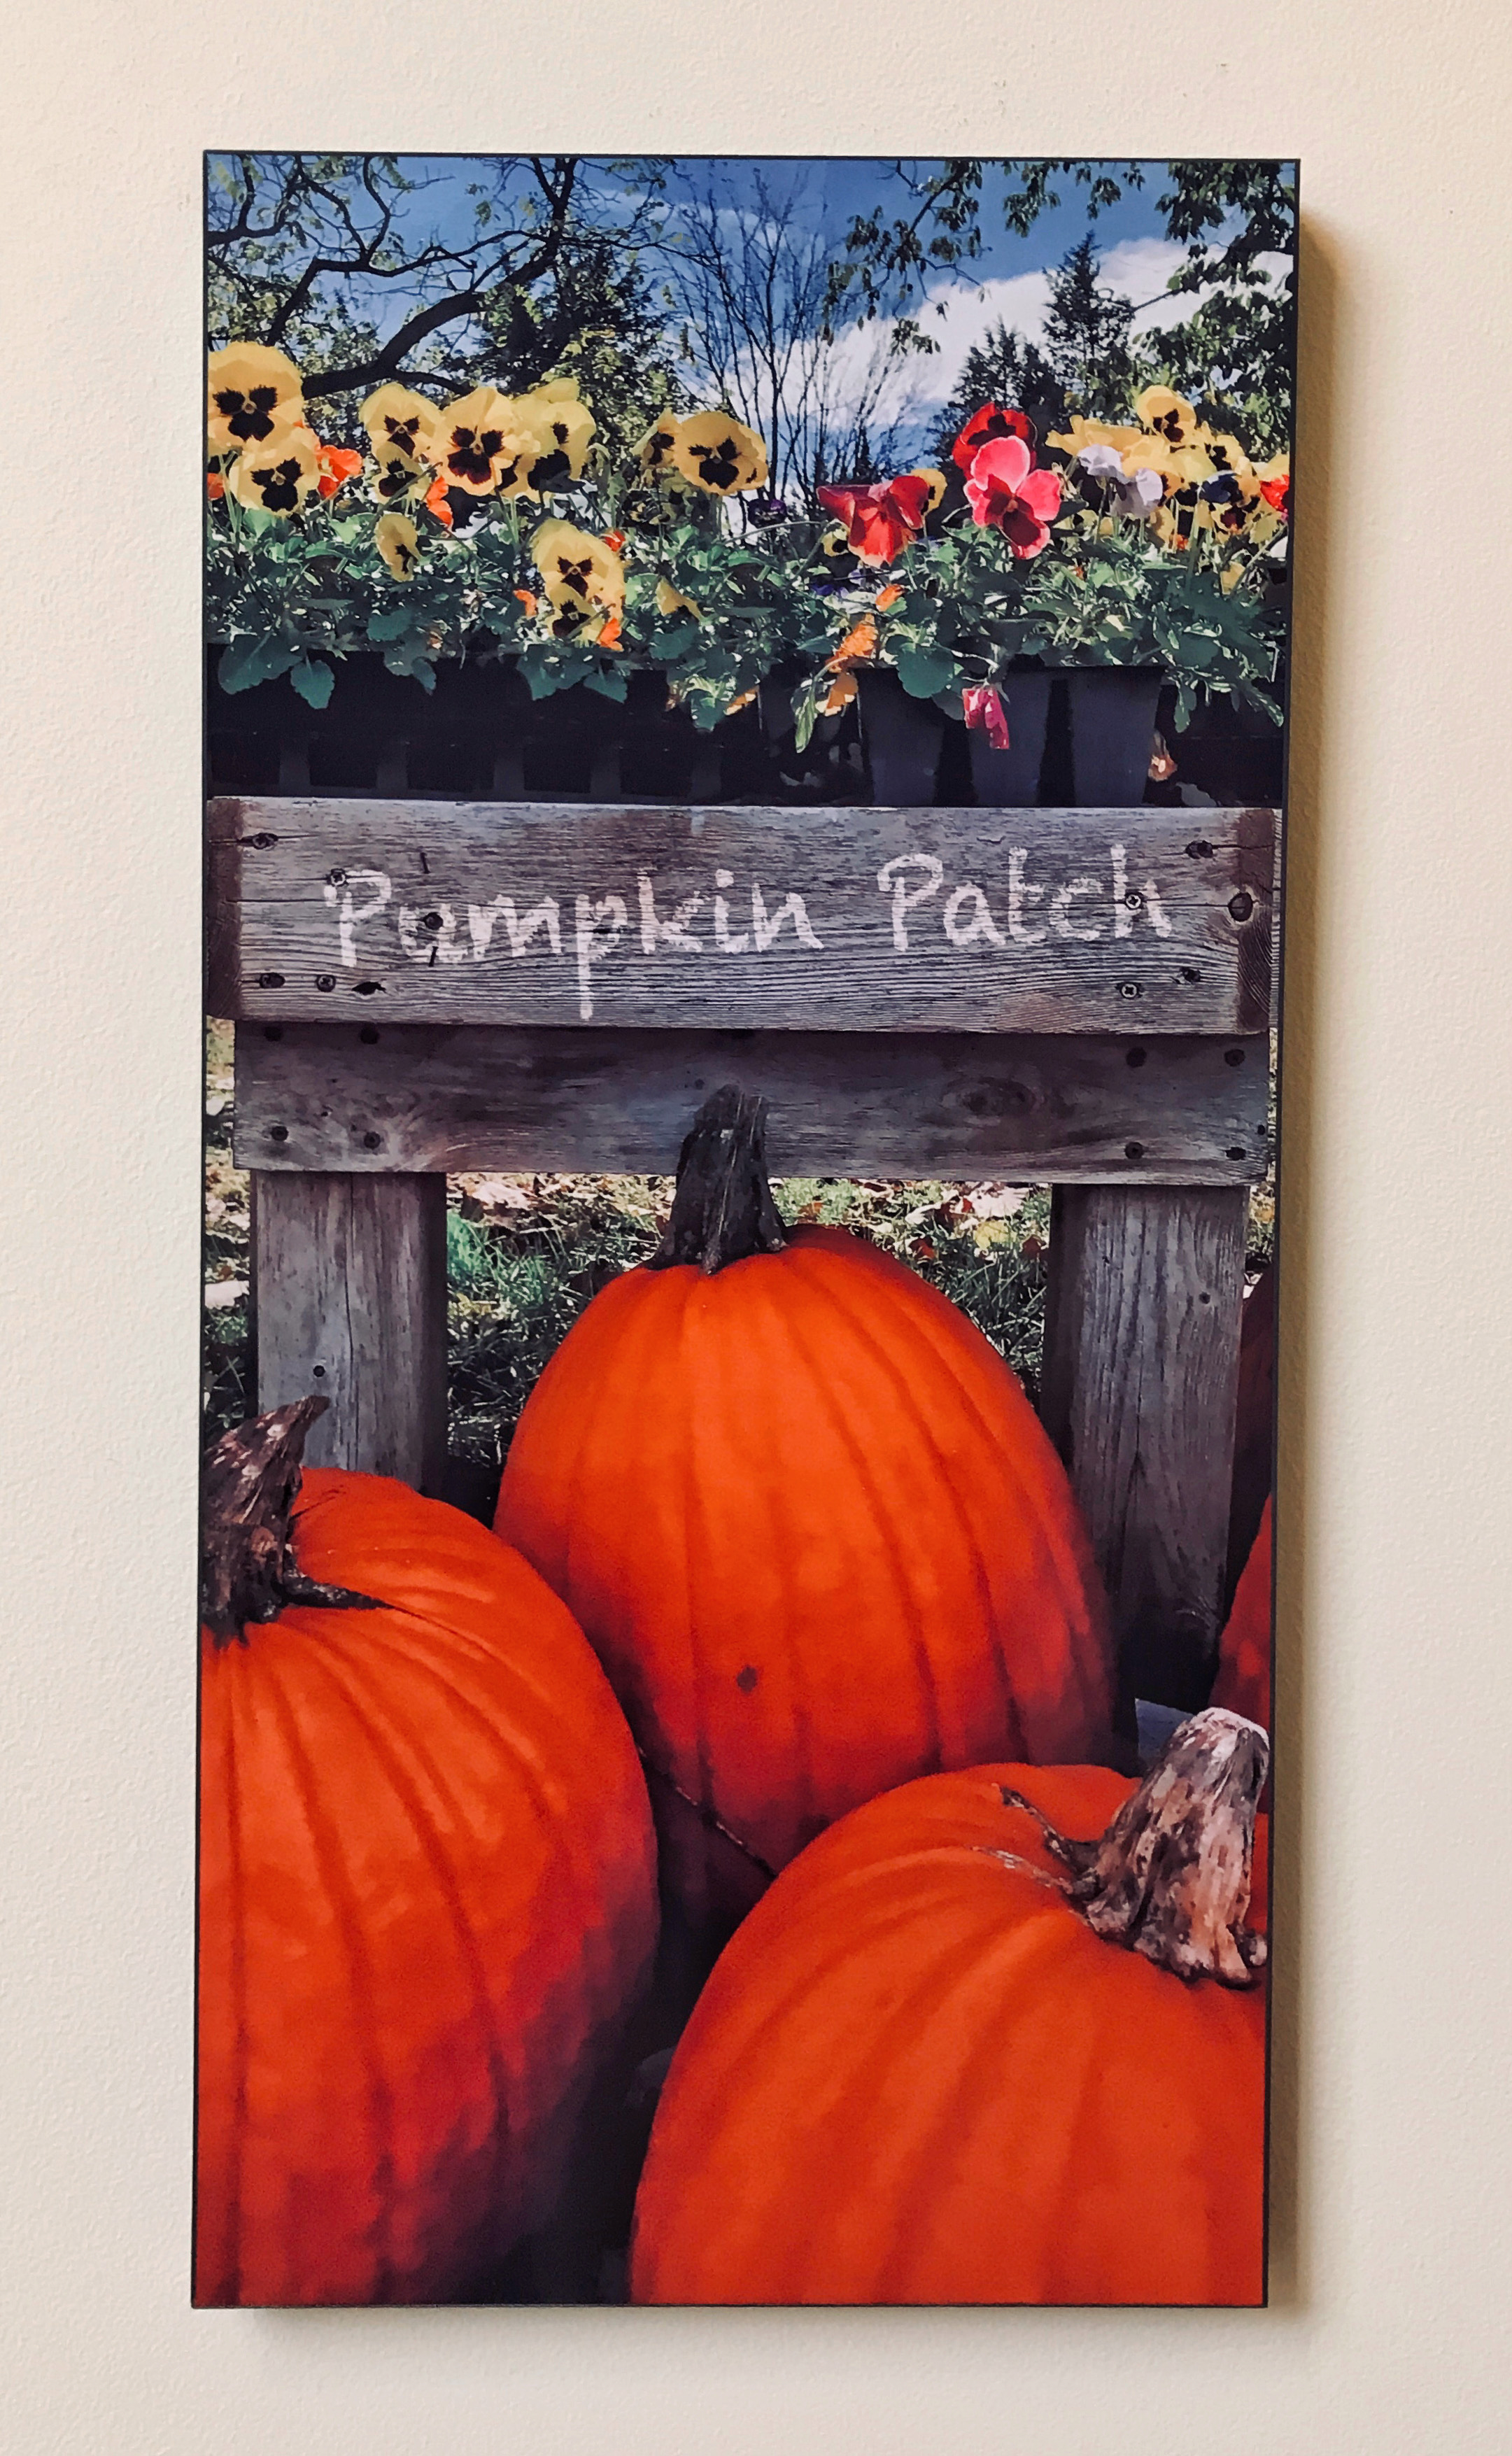 Pumpkin Patch Plaque made with sublimation printing